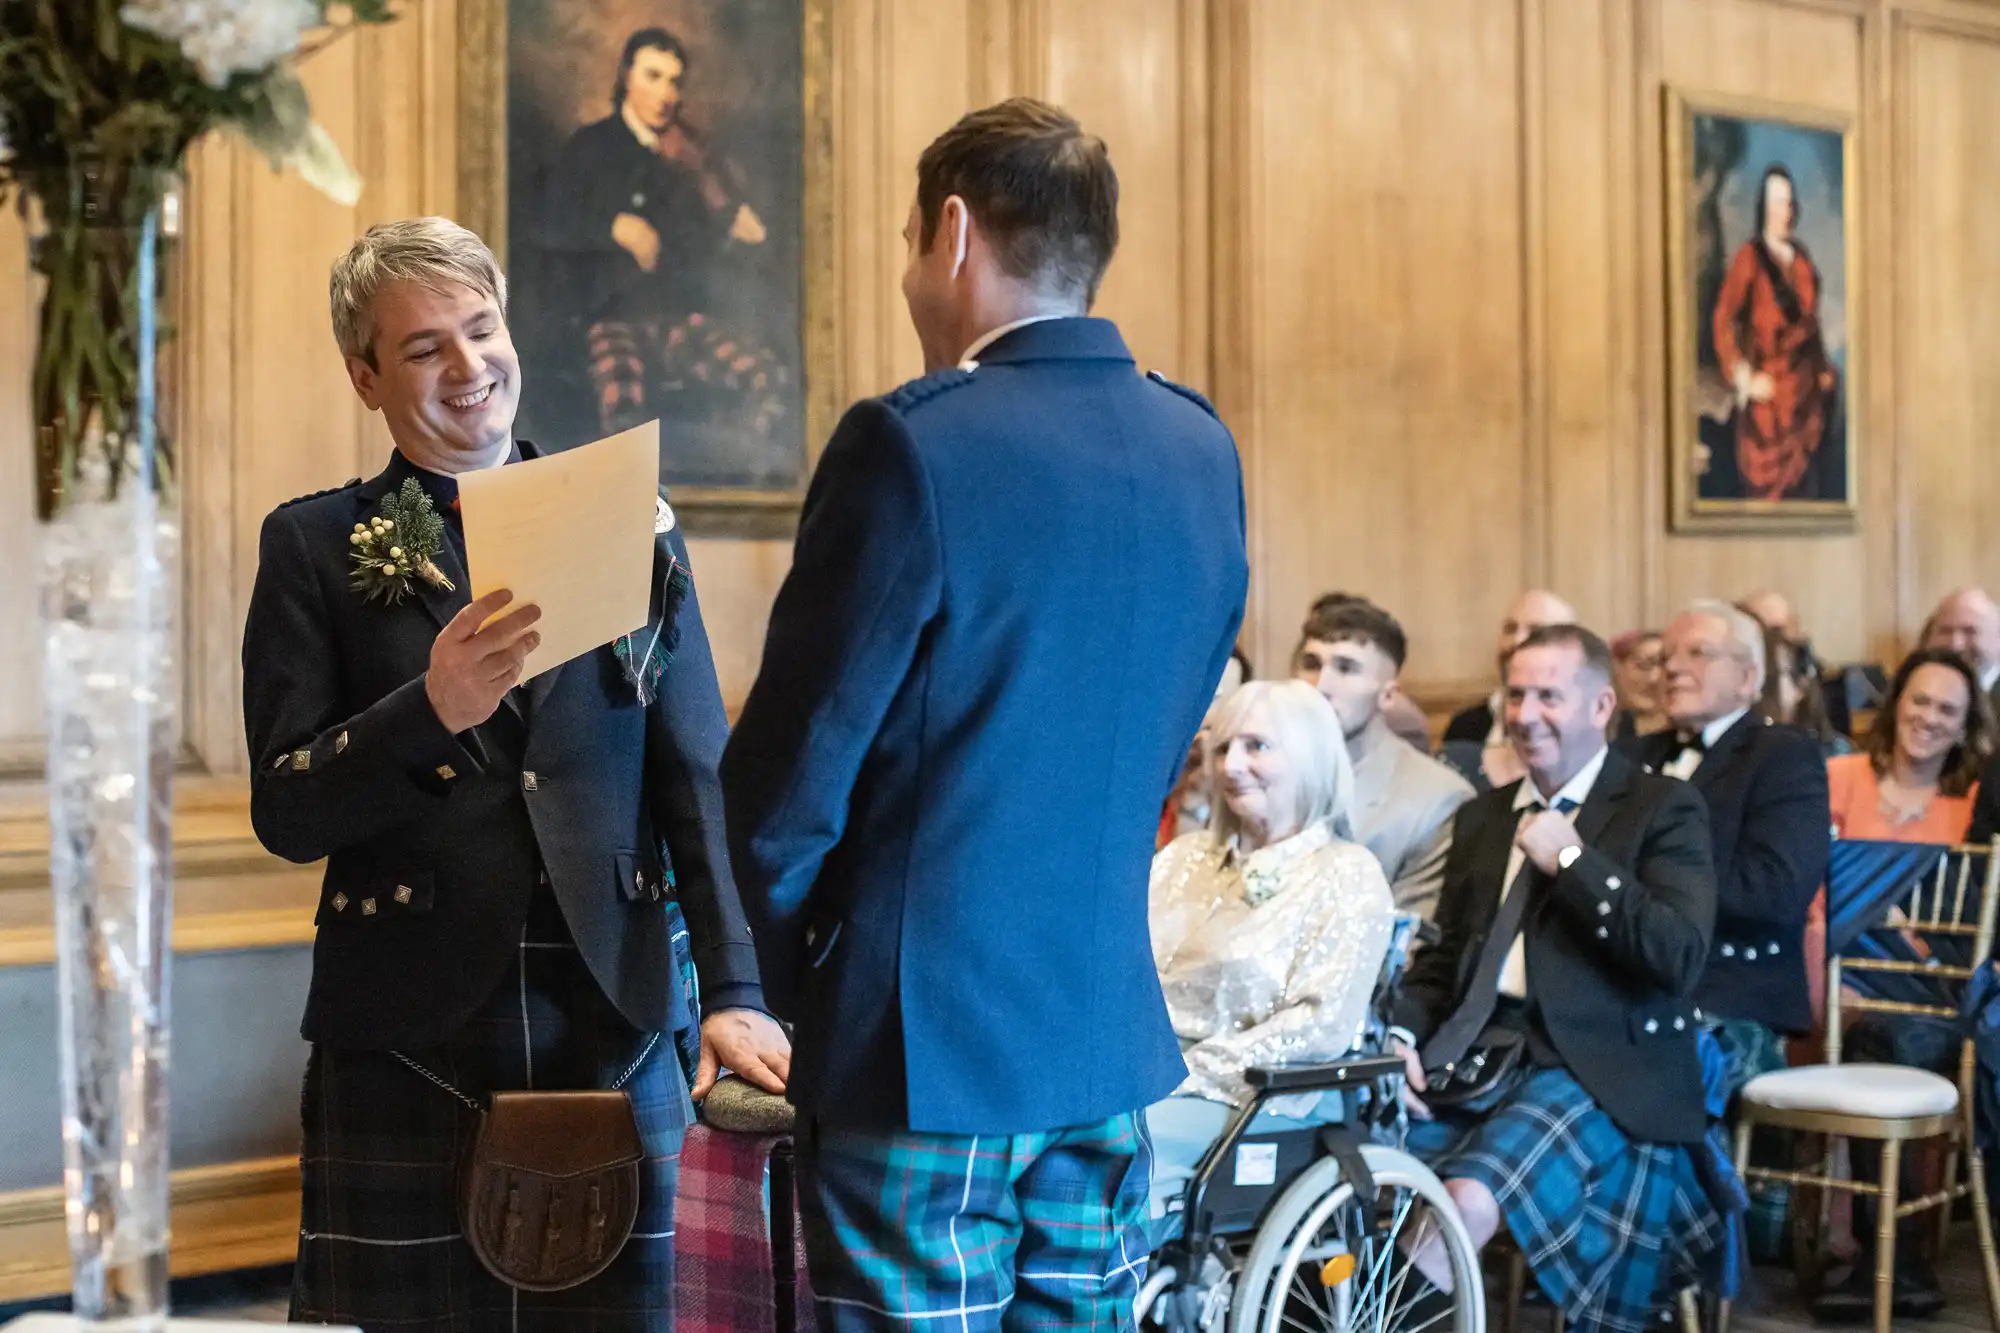 Two men in kilts face each other, one reading from a paper, in a wood-paneled room with people seated and watching, including an elderly woman in a wheelchair.